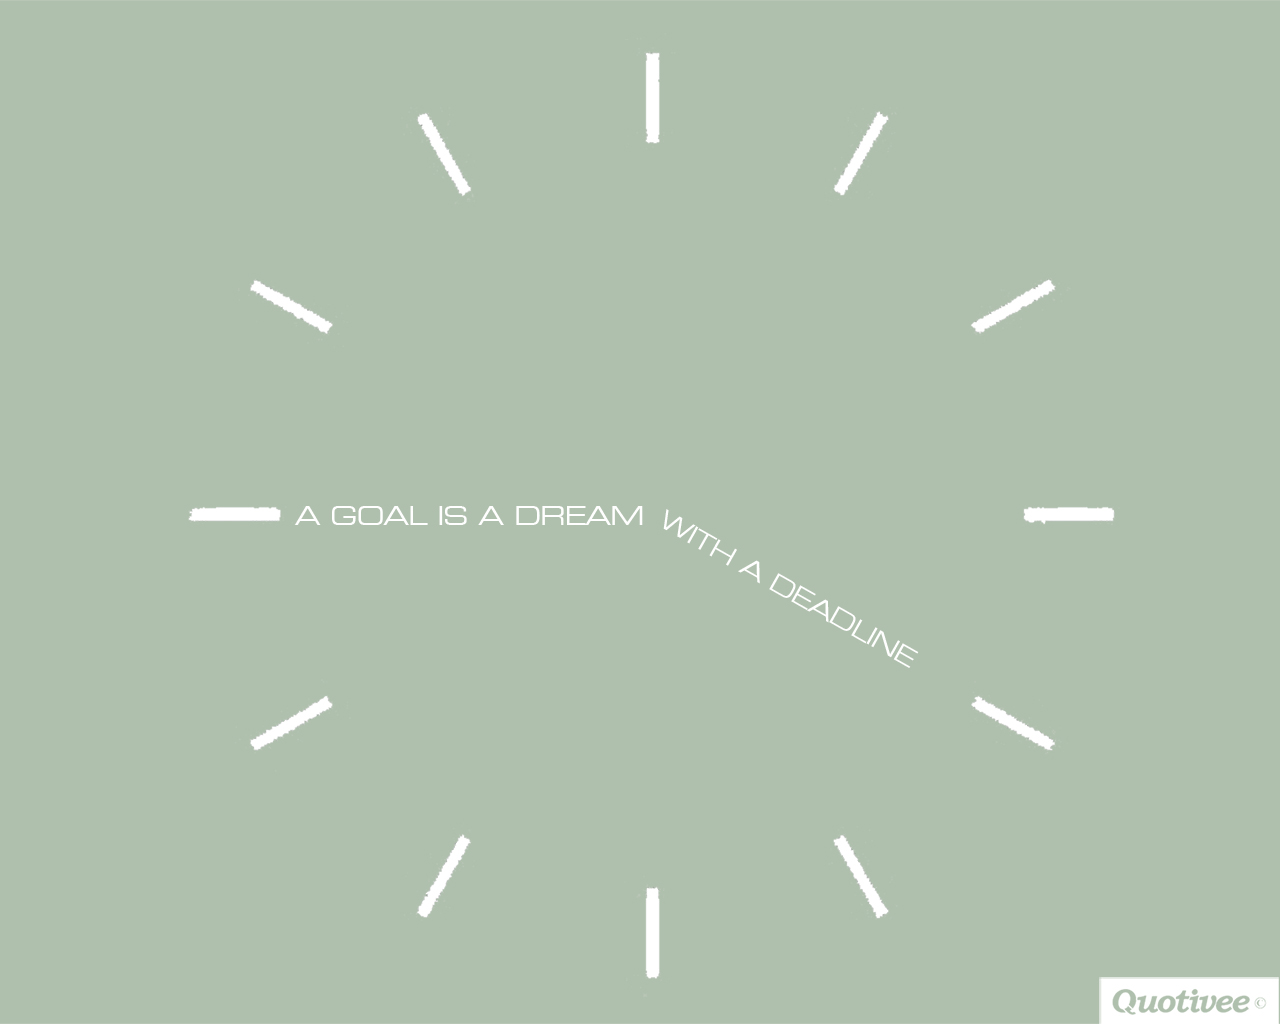 Dream Goal Poster Background Wallpaper Image For Free Download - Pngtree